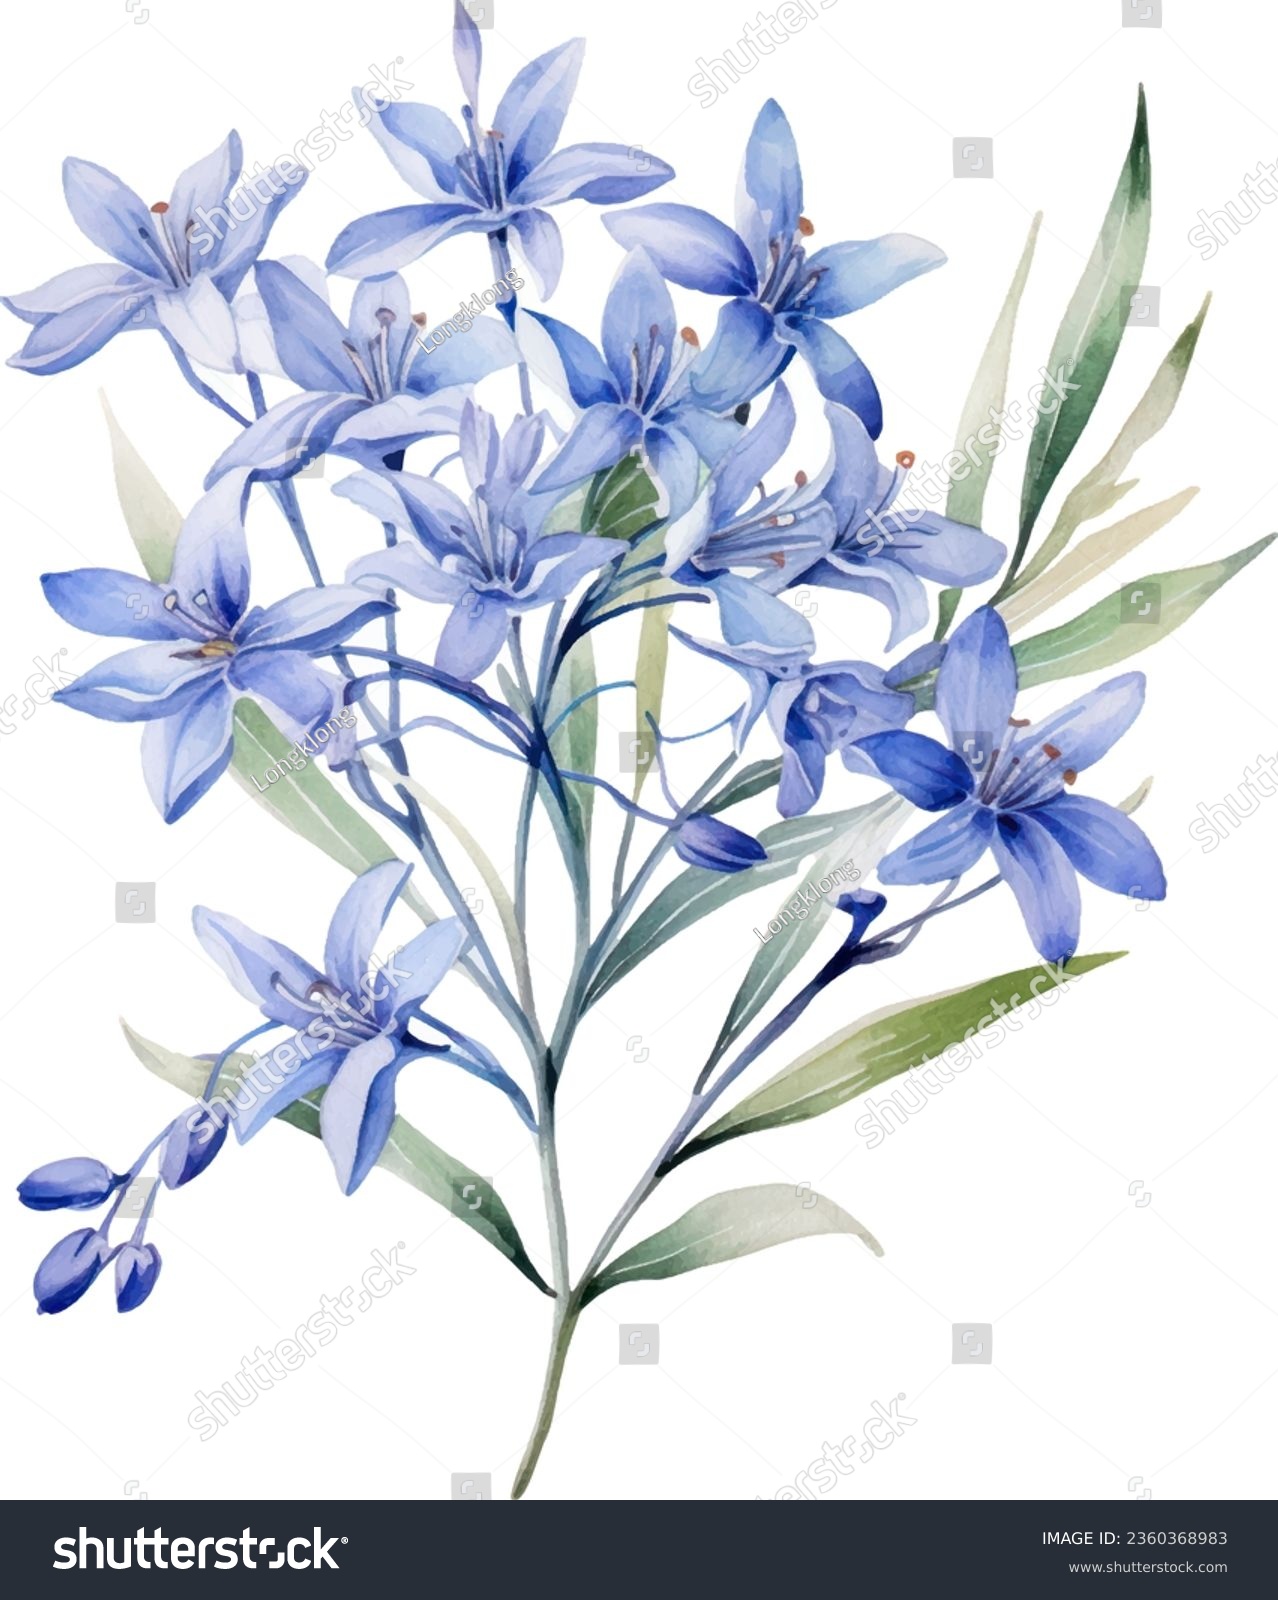 SVG of Agapanthus africanus Watercolor floral arrangements with beautiful African Lily flower, Watercolor floral bouquet. svg